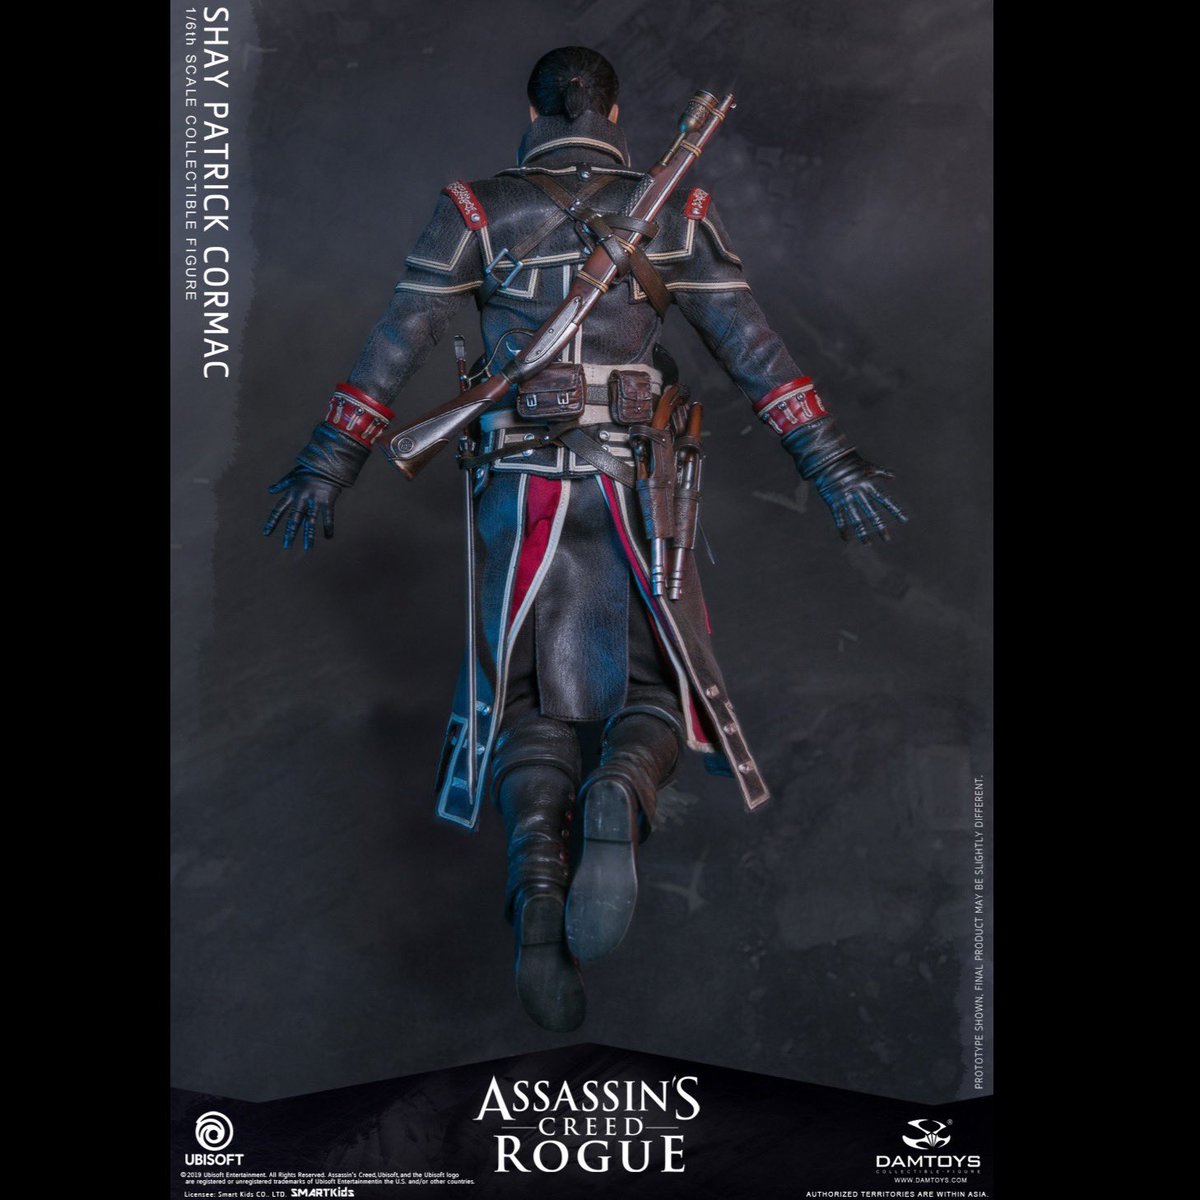 O Xrhsths Damtoys Sto Twitter Damtoys Assassin S Creed Rogue 1 6th Scale Shay Patrick Cormac Collectible Figure Specifications Damtoys Ubisoft Assassinscreed T Co F1kn1k5e0u